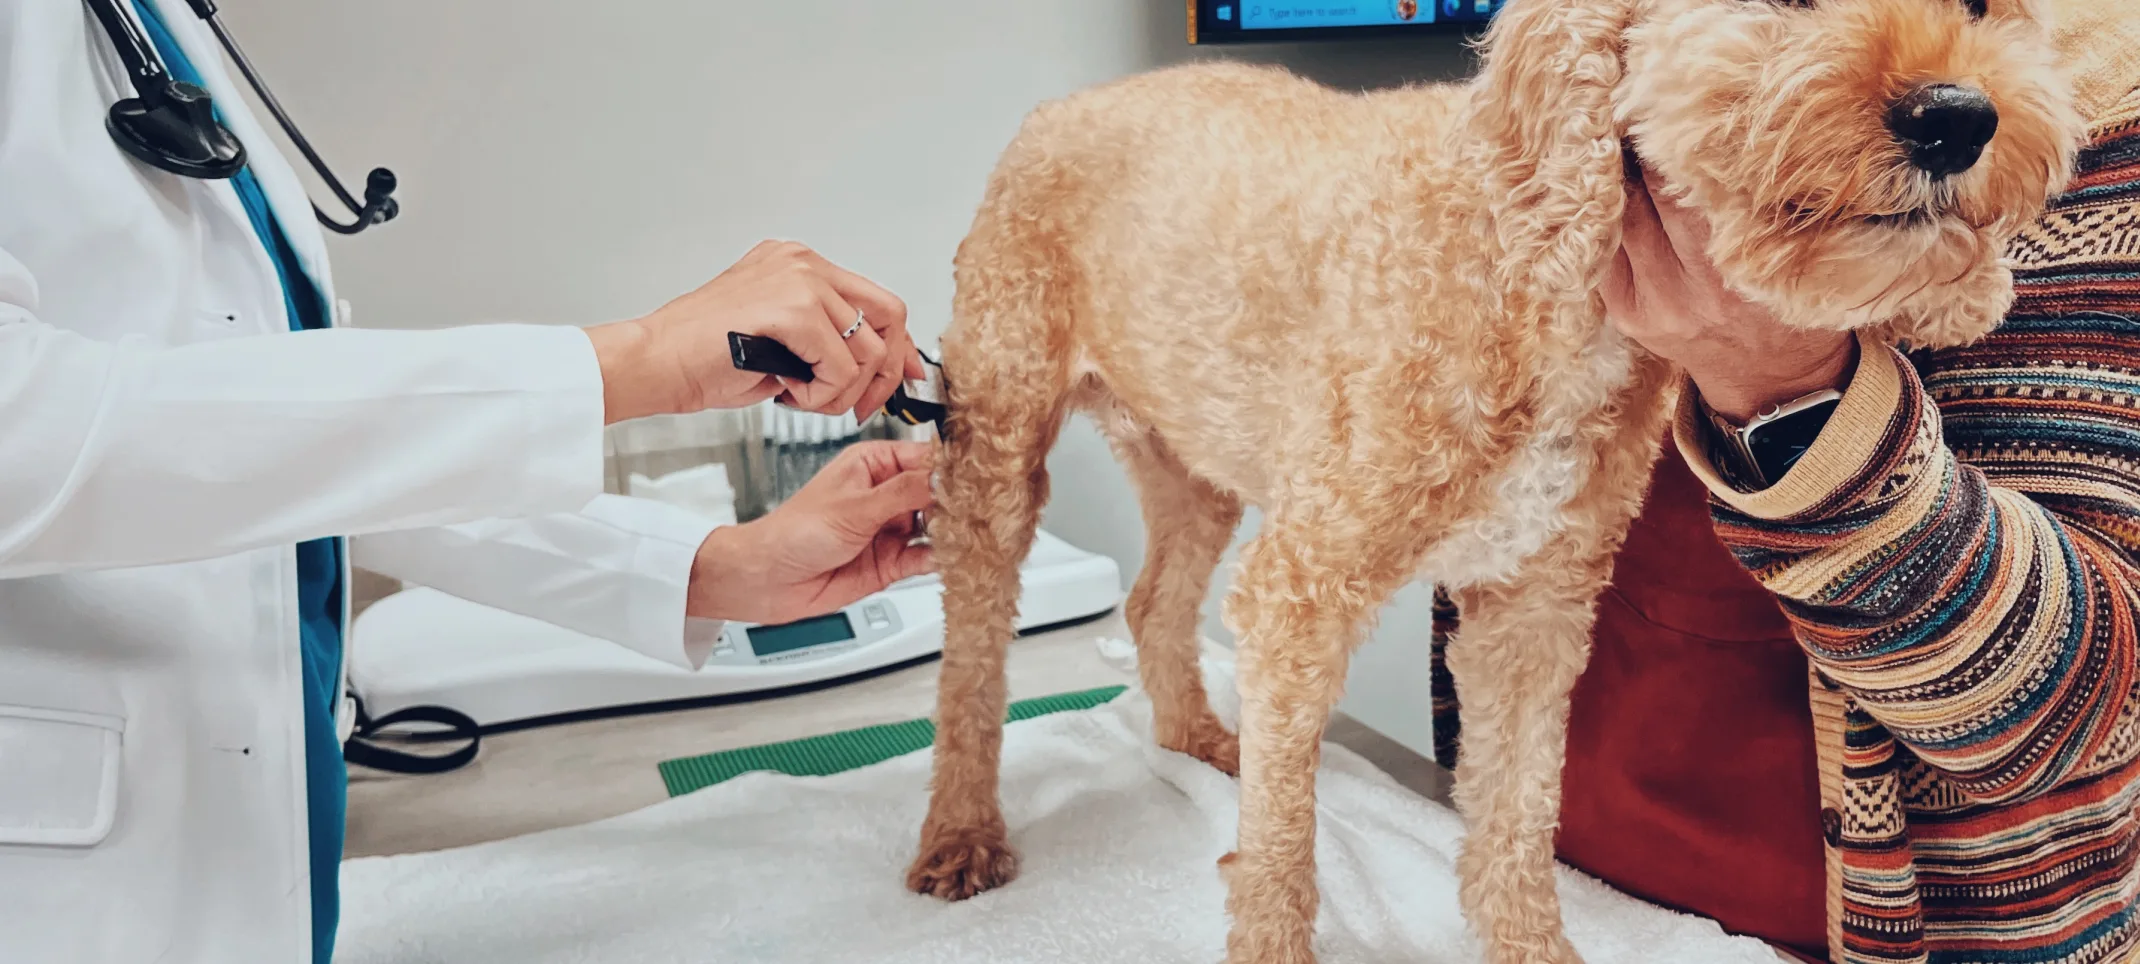 Image of a small dog being examined by two veterinarians.